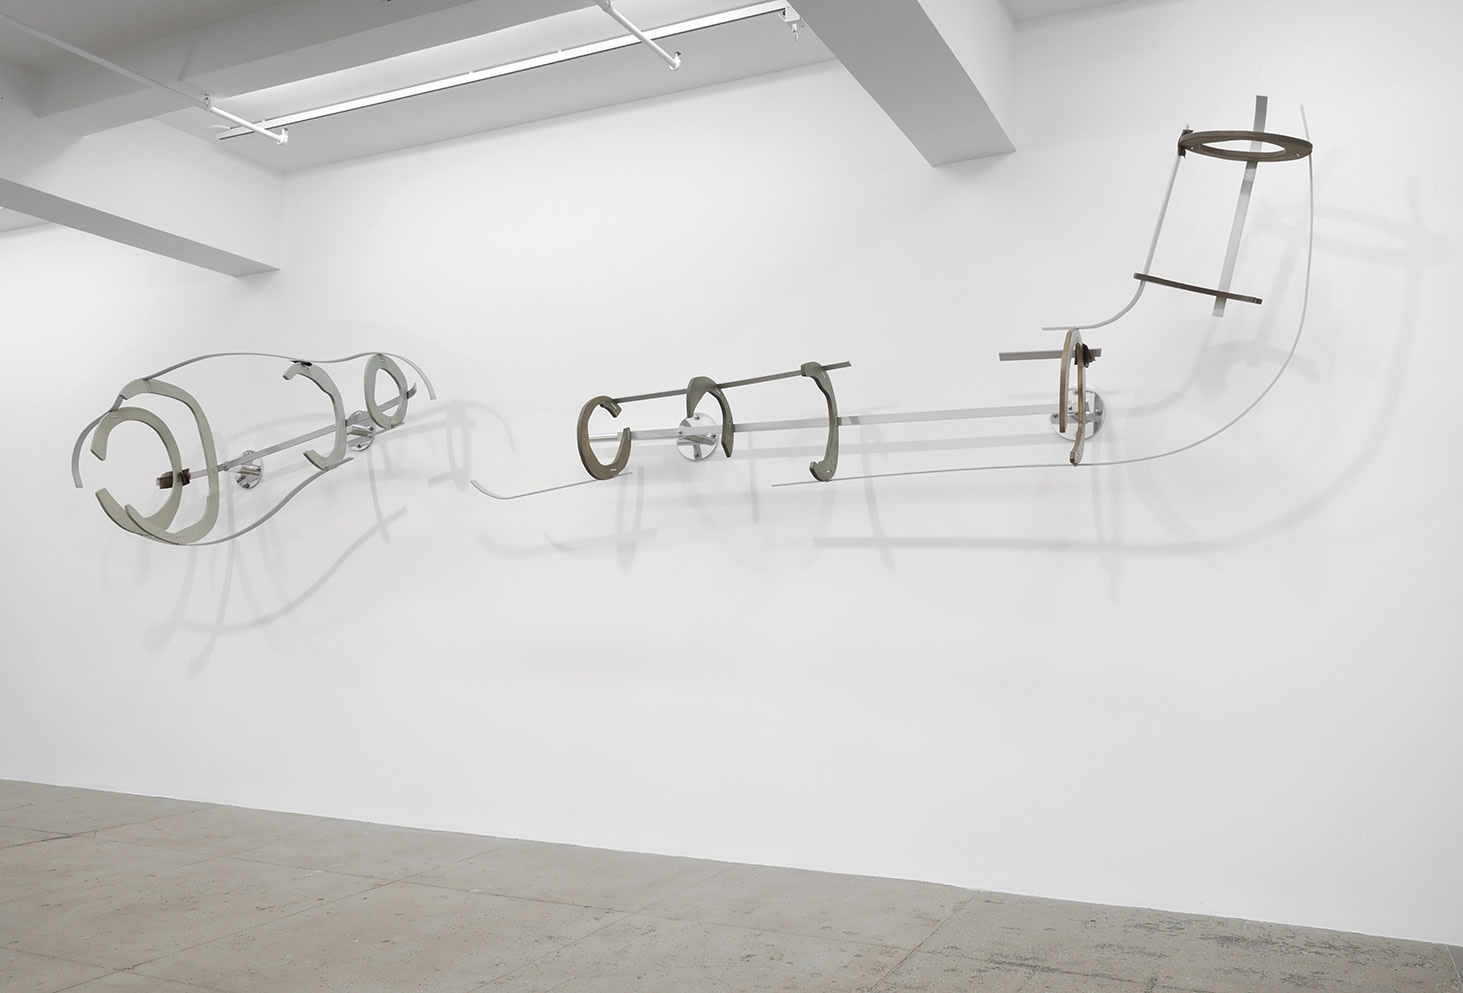 An abstract sculpture is attached to the wall in various pieces connected by thin metal wire.